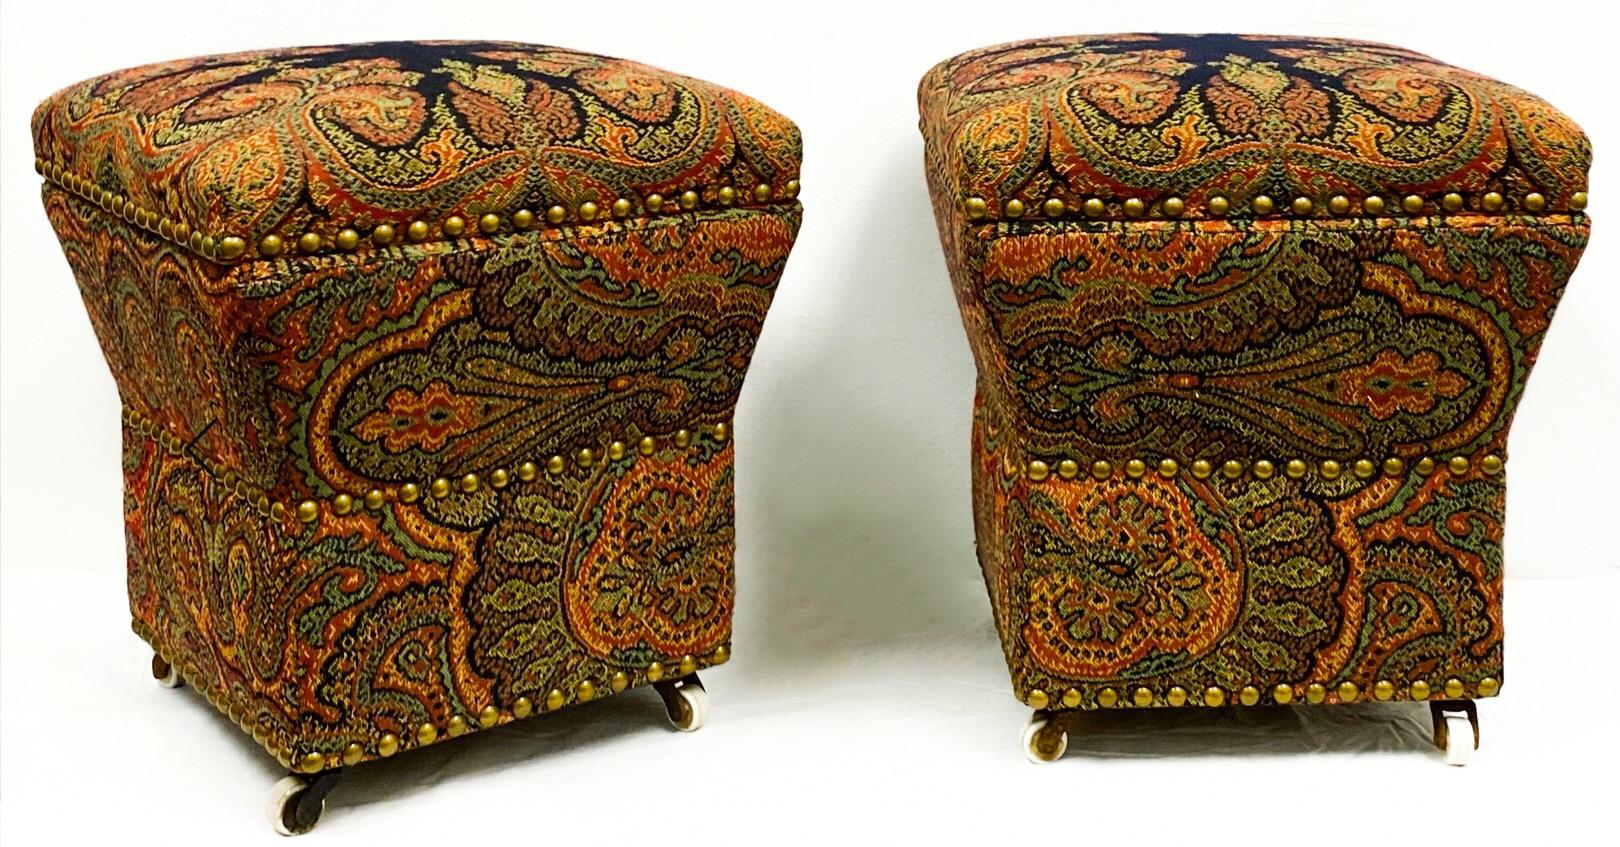 English Paisley Upholstered Storage Ottomans, a Pair In Good Condition For Sale In Kennesaw, GA